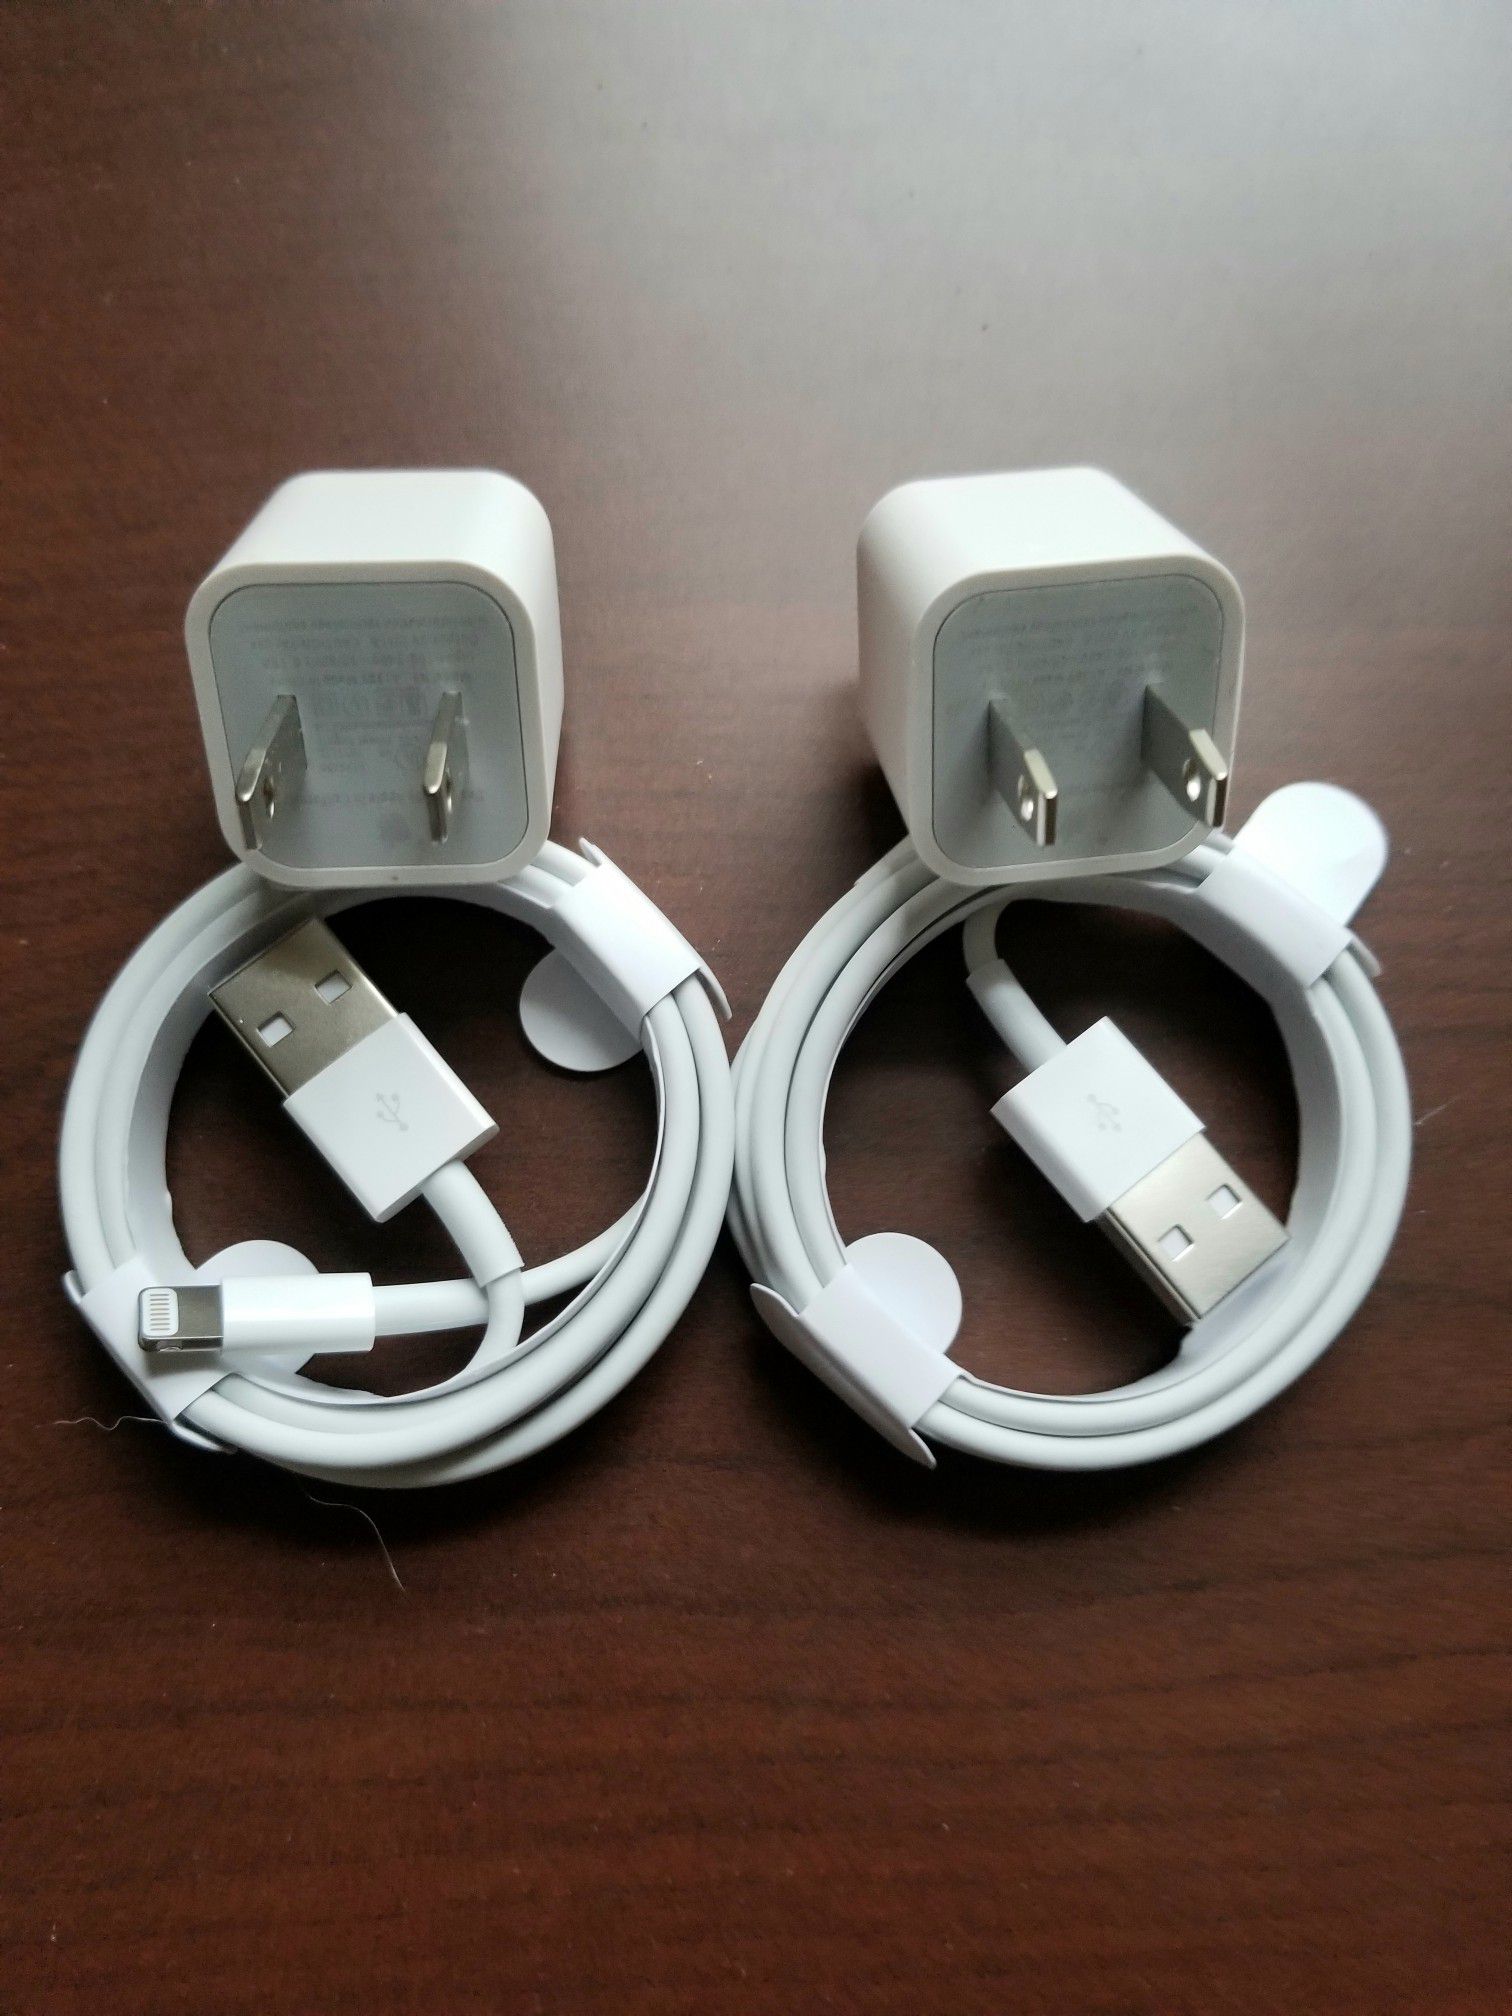 2 brand new iphone chargers ( shipping or pickup available)